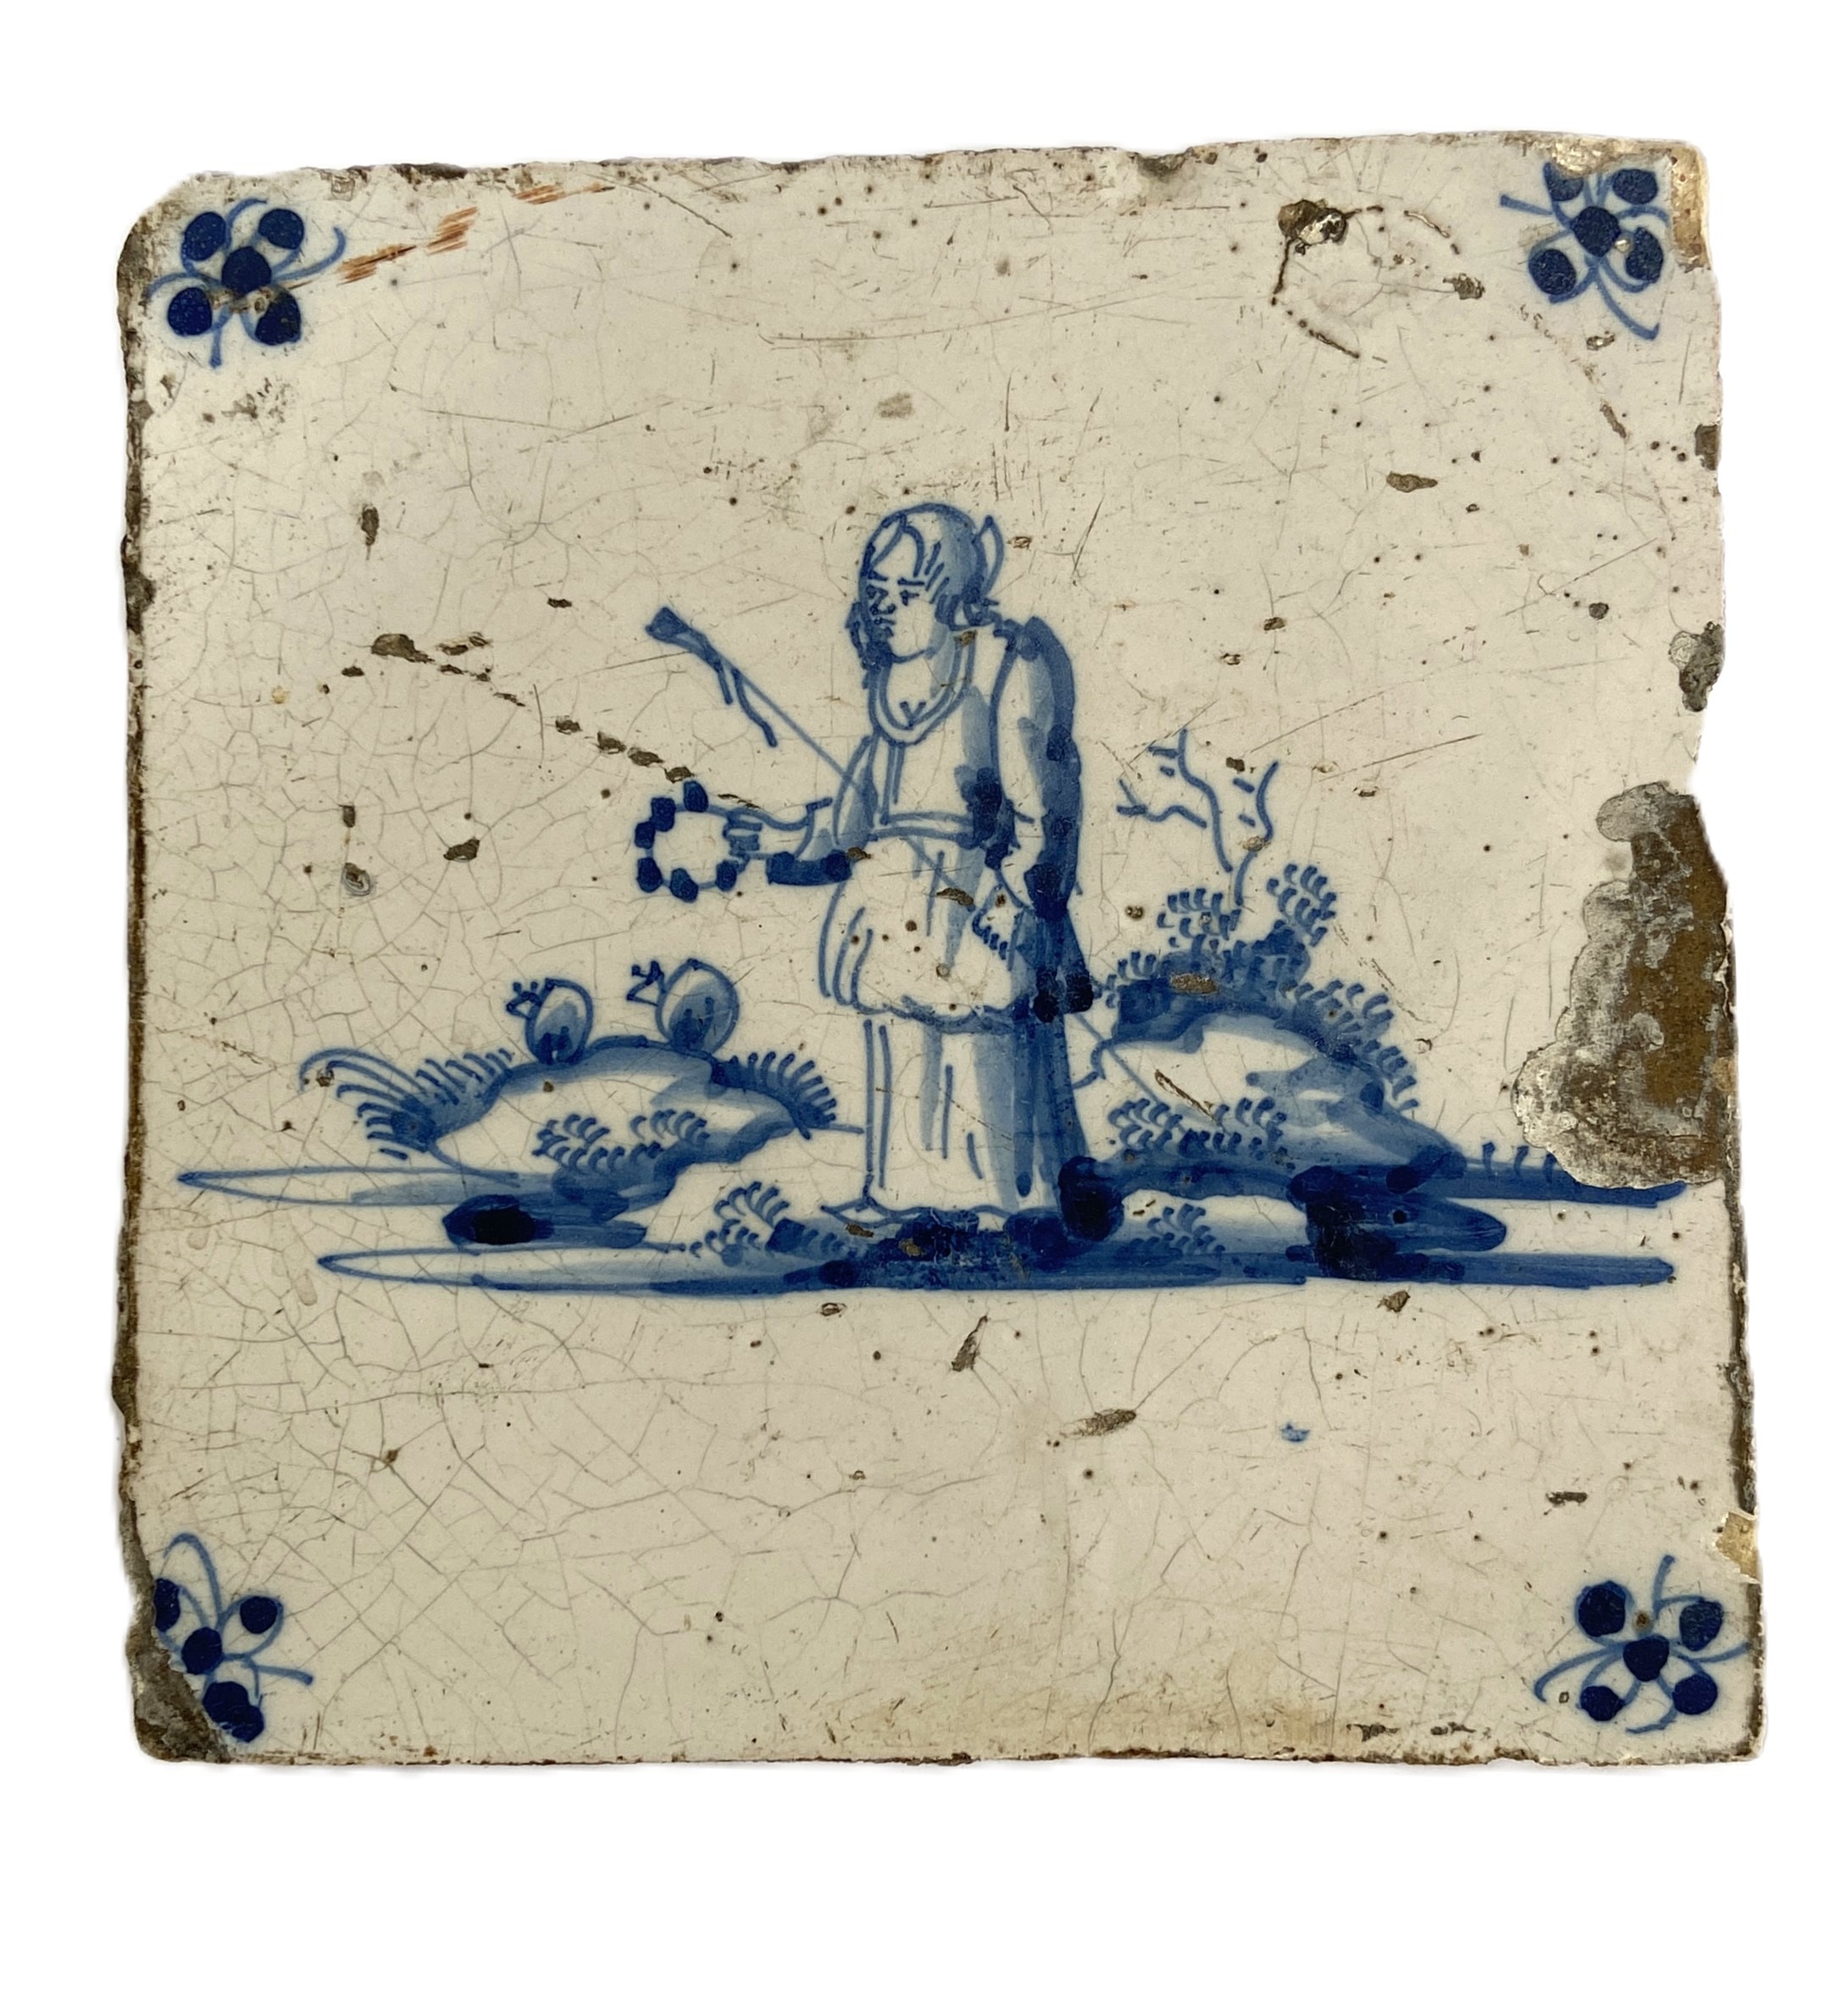 Two Dutch Delft tin glazed blue and white decorated tiles (apparently found in an Amsterdam cellar); - Image 4 of 5